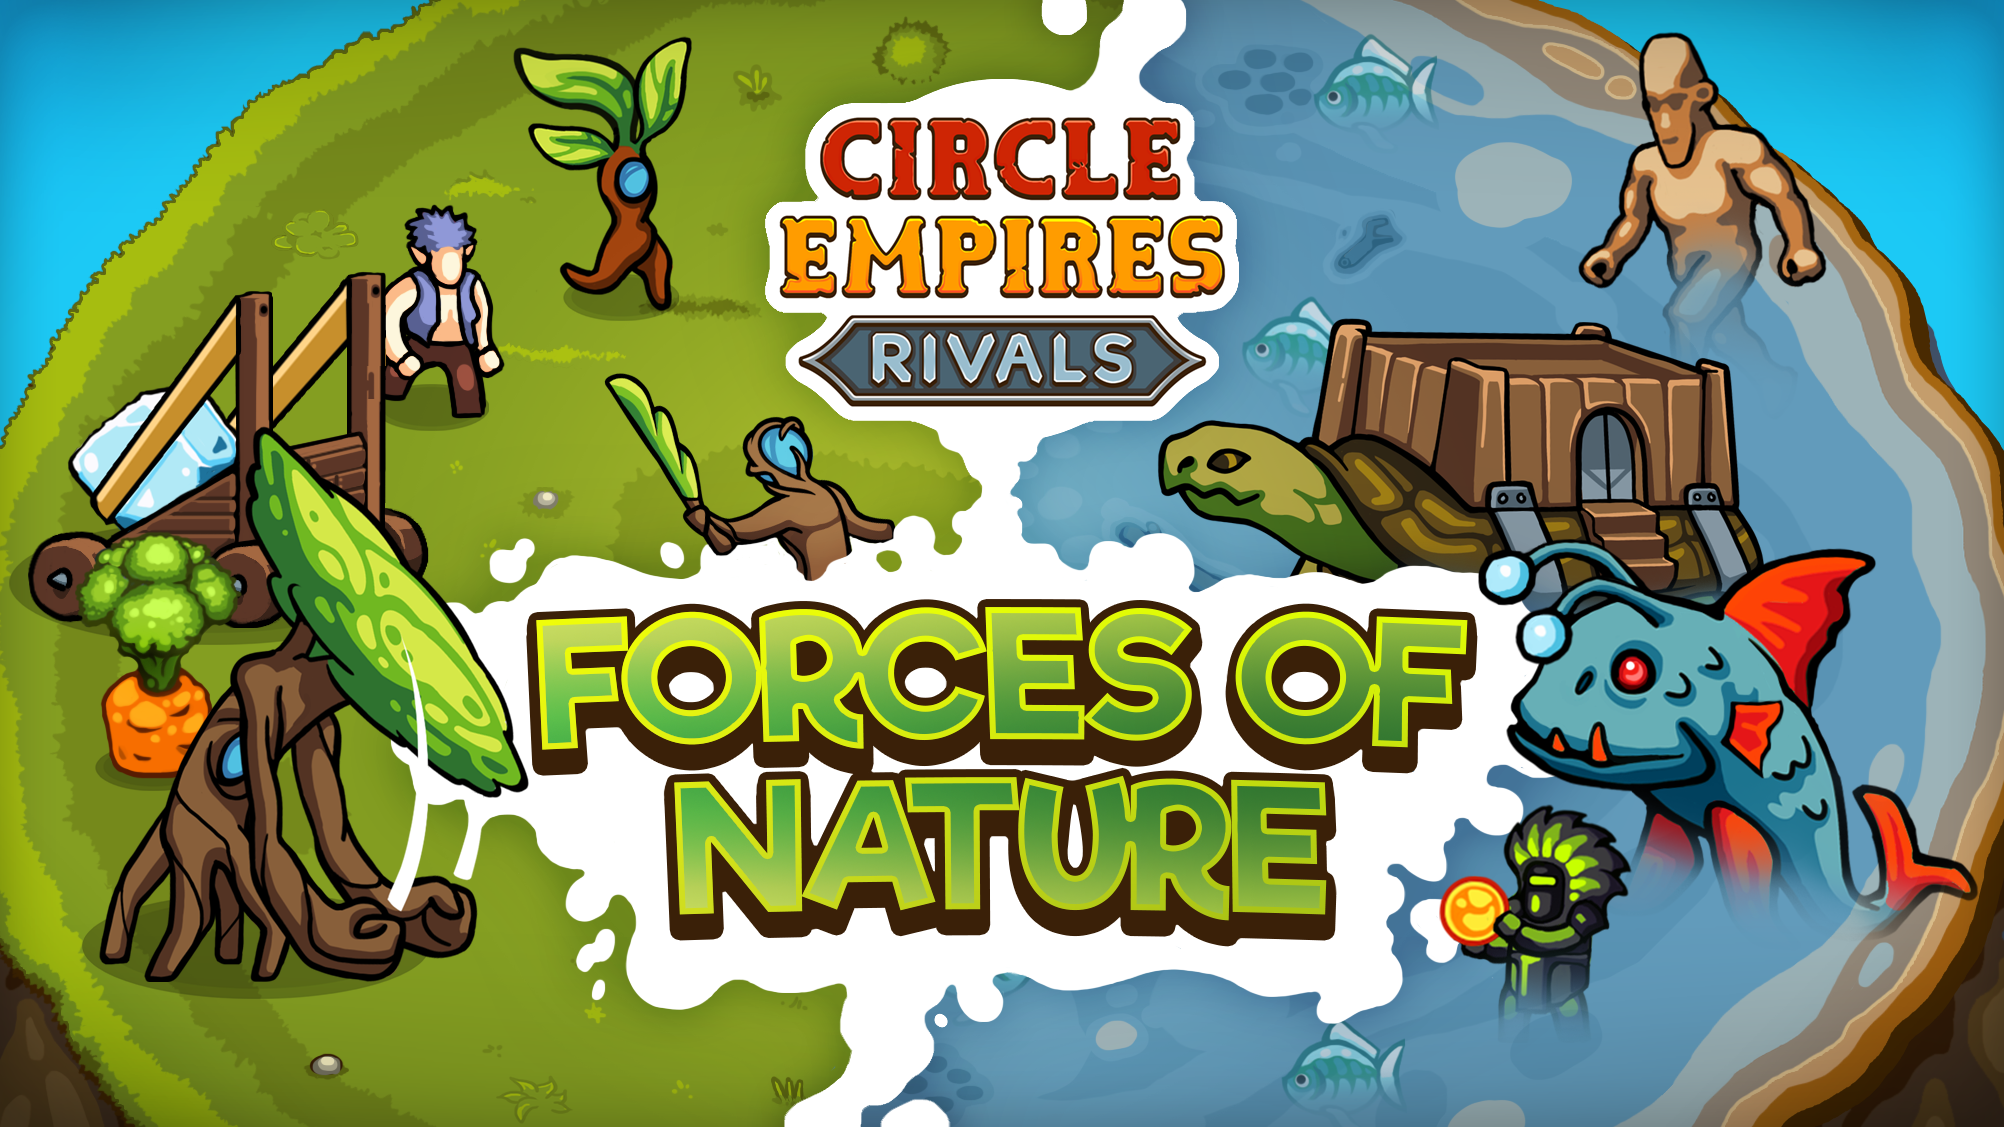 Circle Empires Rivals Forces of Nature logo